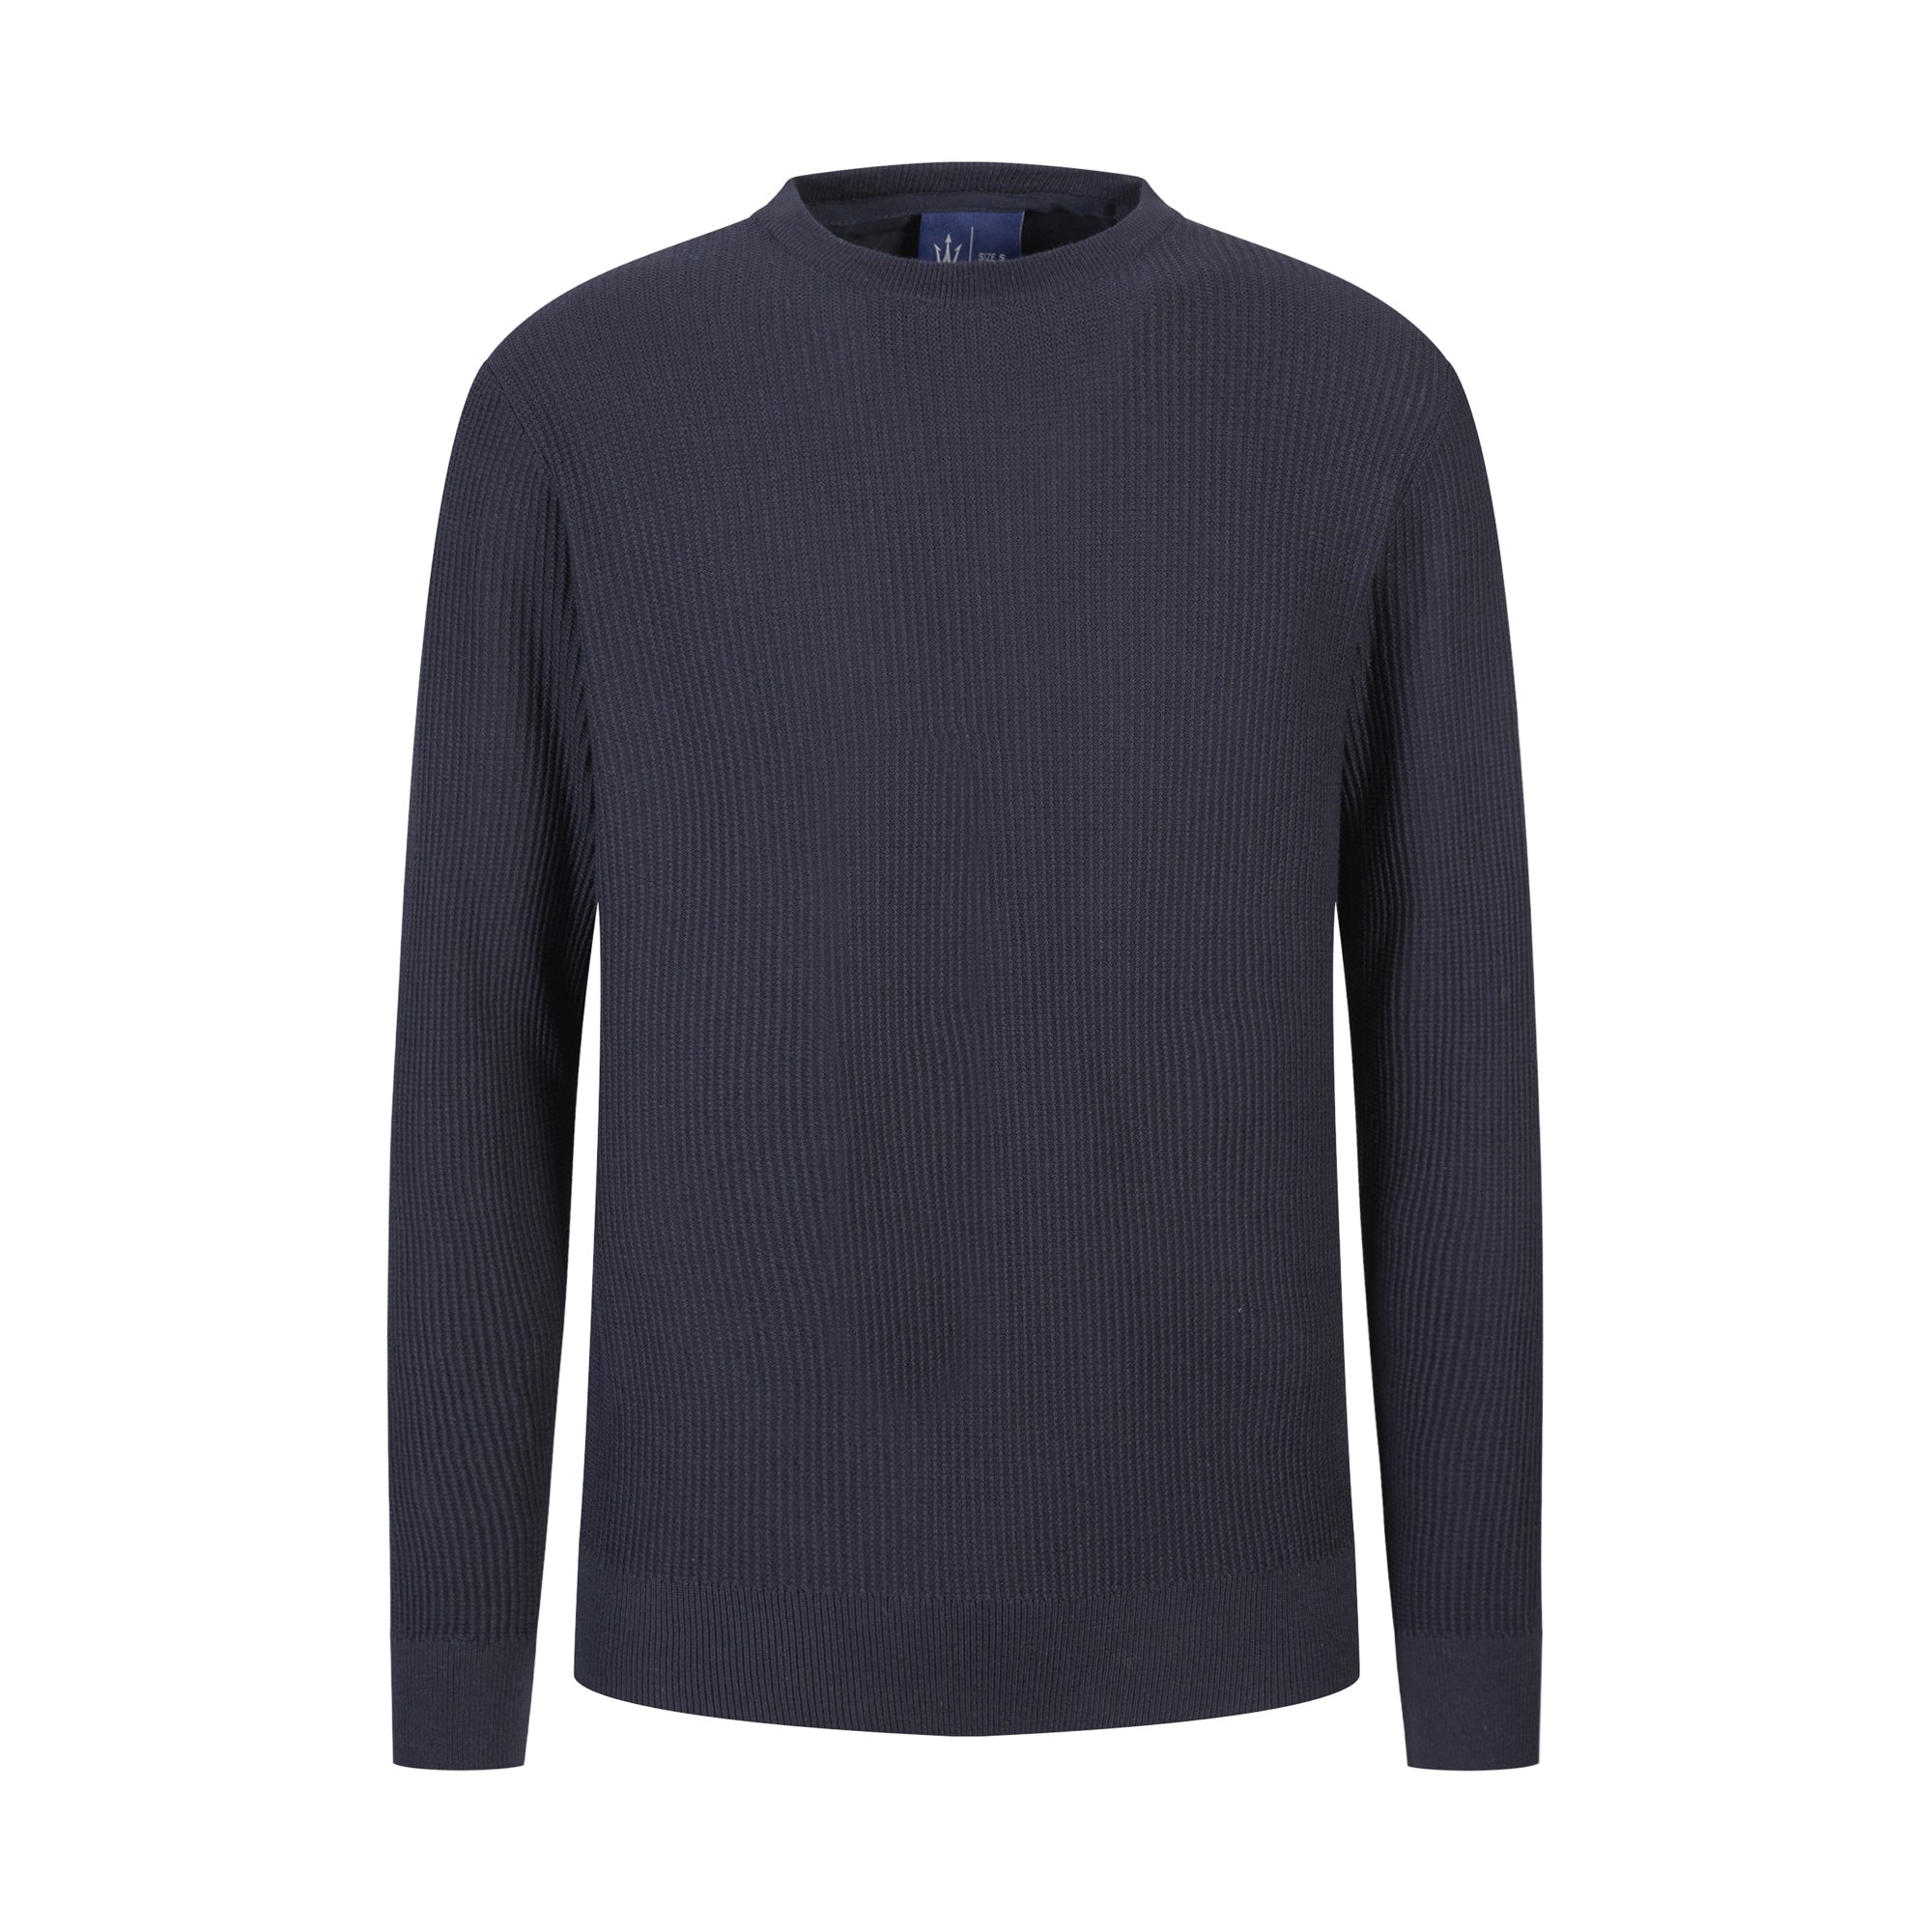 Apparel and accessories / Apparel / Menswear / Sweaters – ROW Maseratistore